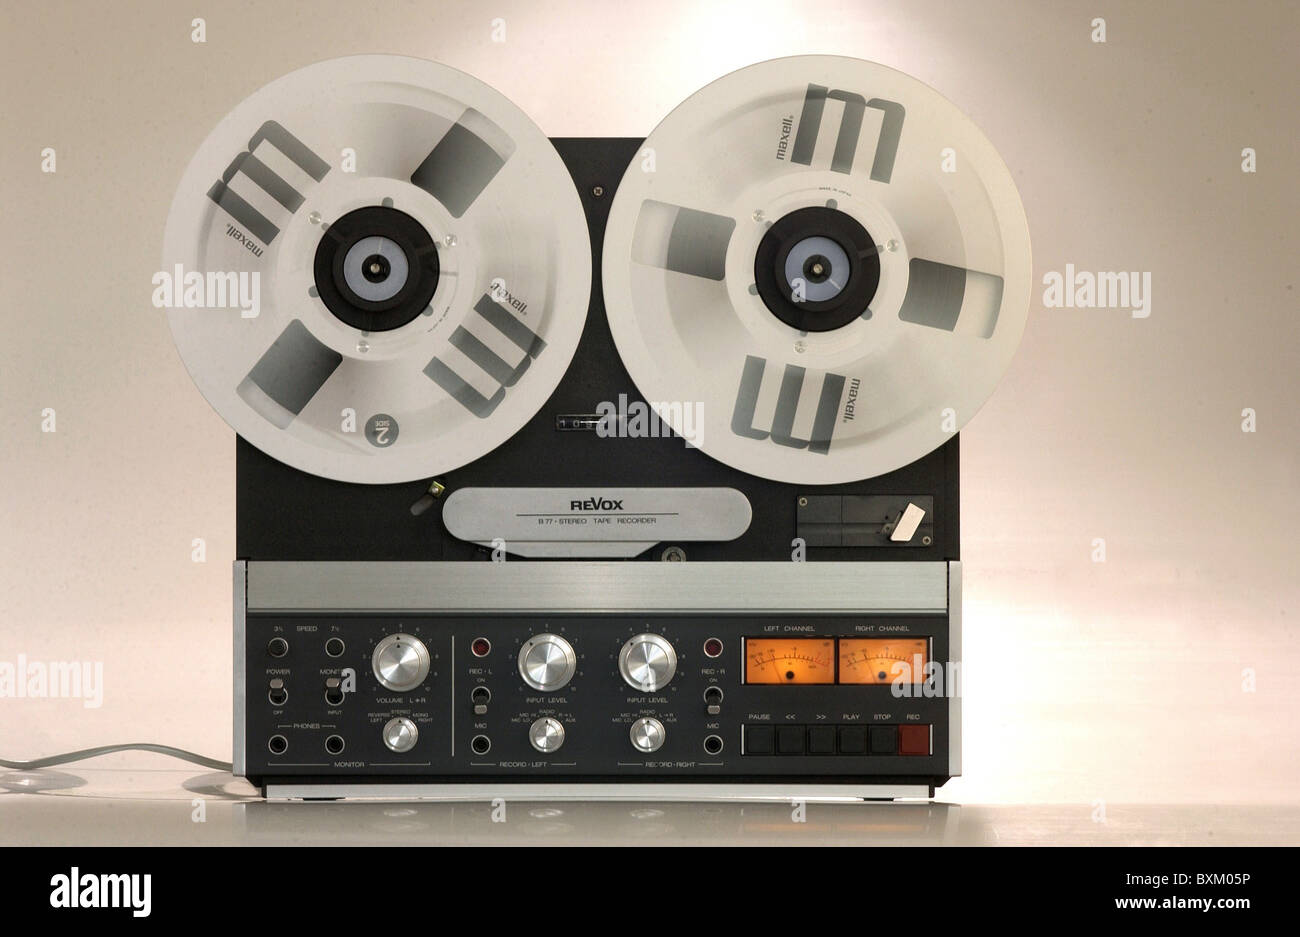 technics, tape recorder, Revox B77, made by Willi Studer AG, Regensdorf-Zurich, Switzerland, 1978, tape recorders, 1970s, 70s, 20th century, historic, historical, technic, electronics, magnetic tapes, Maxell tapes, weight: 17 kilogram, recording device, devices, audio, Additional-Rights-Clearences-Not Available Stock Photo